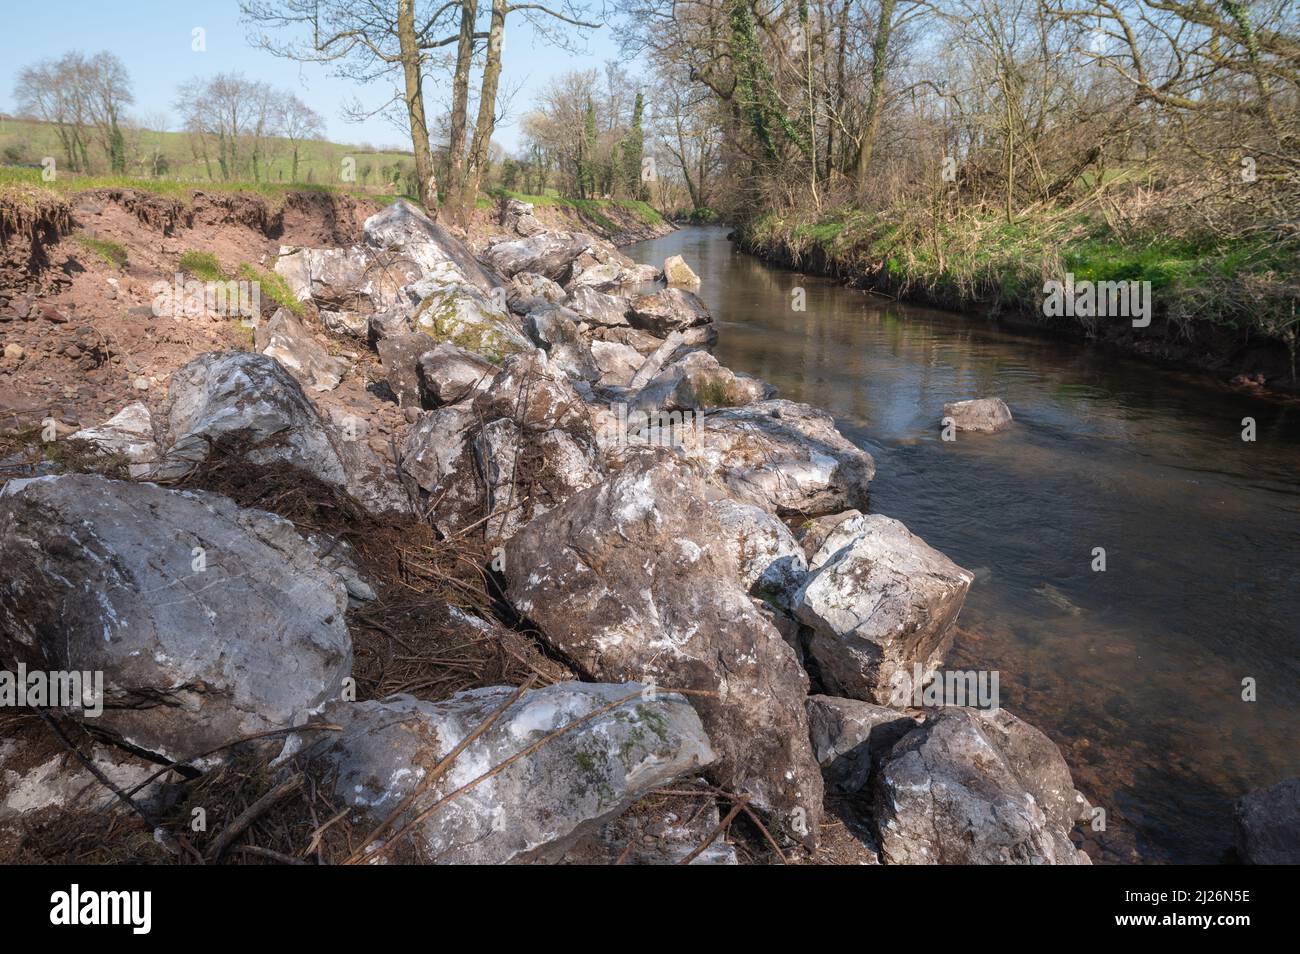 Limestone block stone placed in river in an attempt to stop bank erosion and flooding. This was exacerbated by dredging of gravel further upstream. Stock Photo